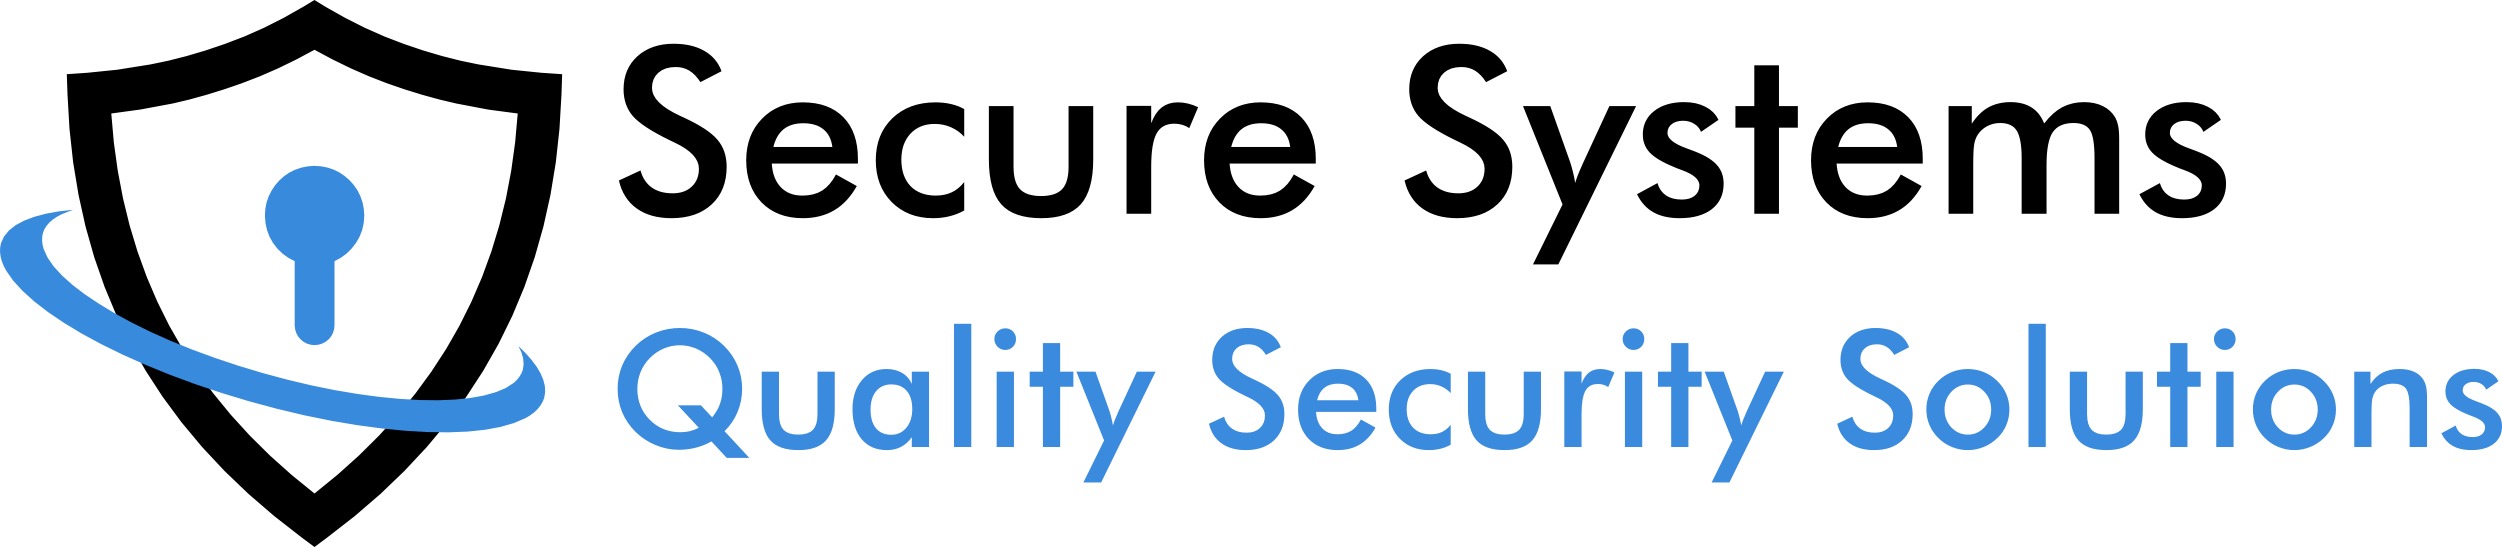 Secure Systems Logo